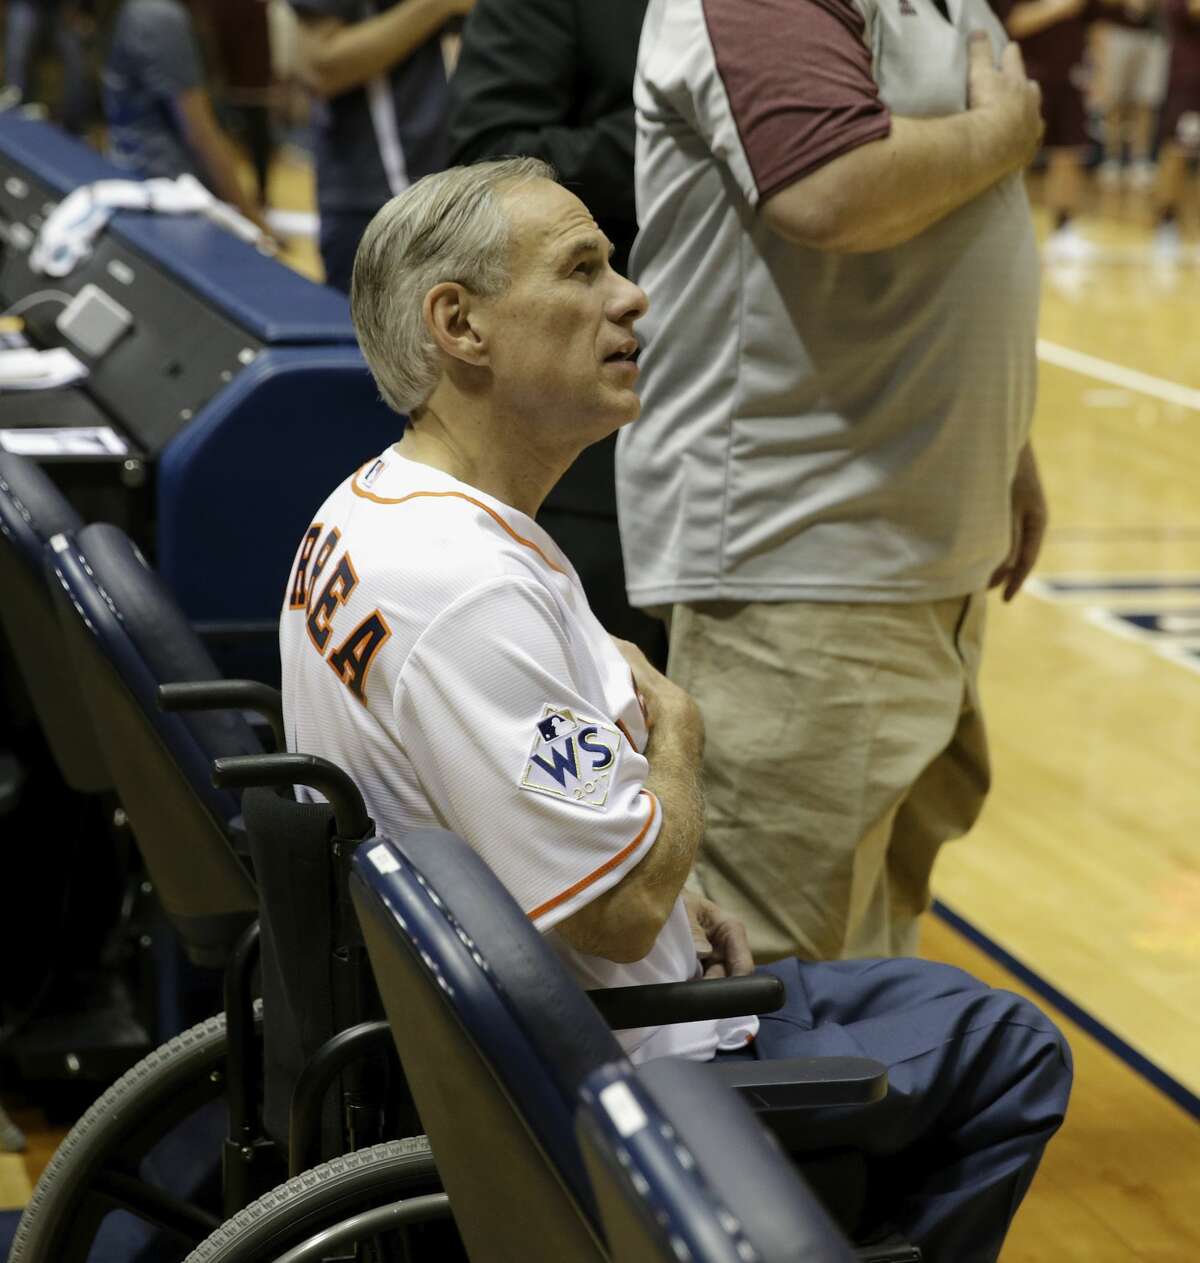 Texas Governor Greg Abbott sings during the National Anthem during the exhibition basketball game between the Texas Longhorns and the Texas A&M Aggies to benefit the Rebuild Texas Relief Fund at Tudor Fieldhouse in Houston, TX on Wednesday, October 25, 2017.